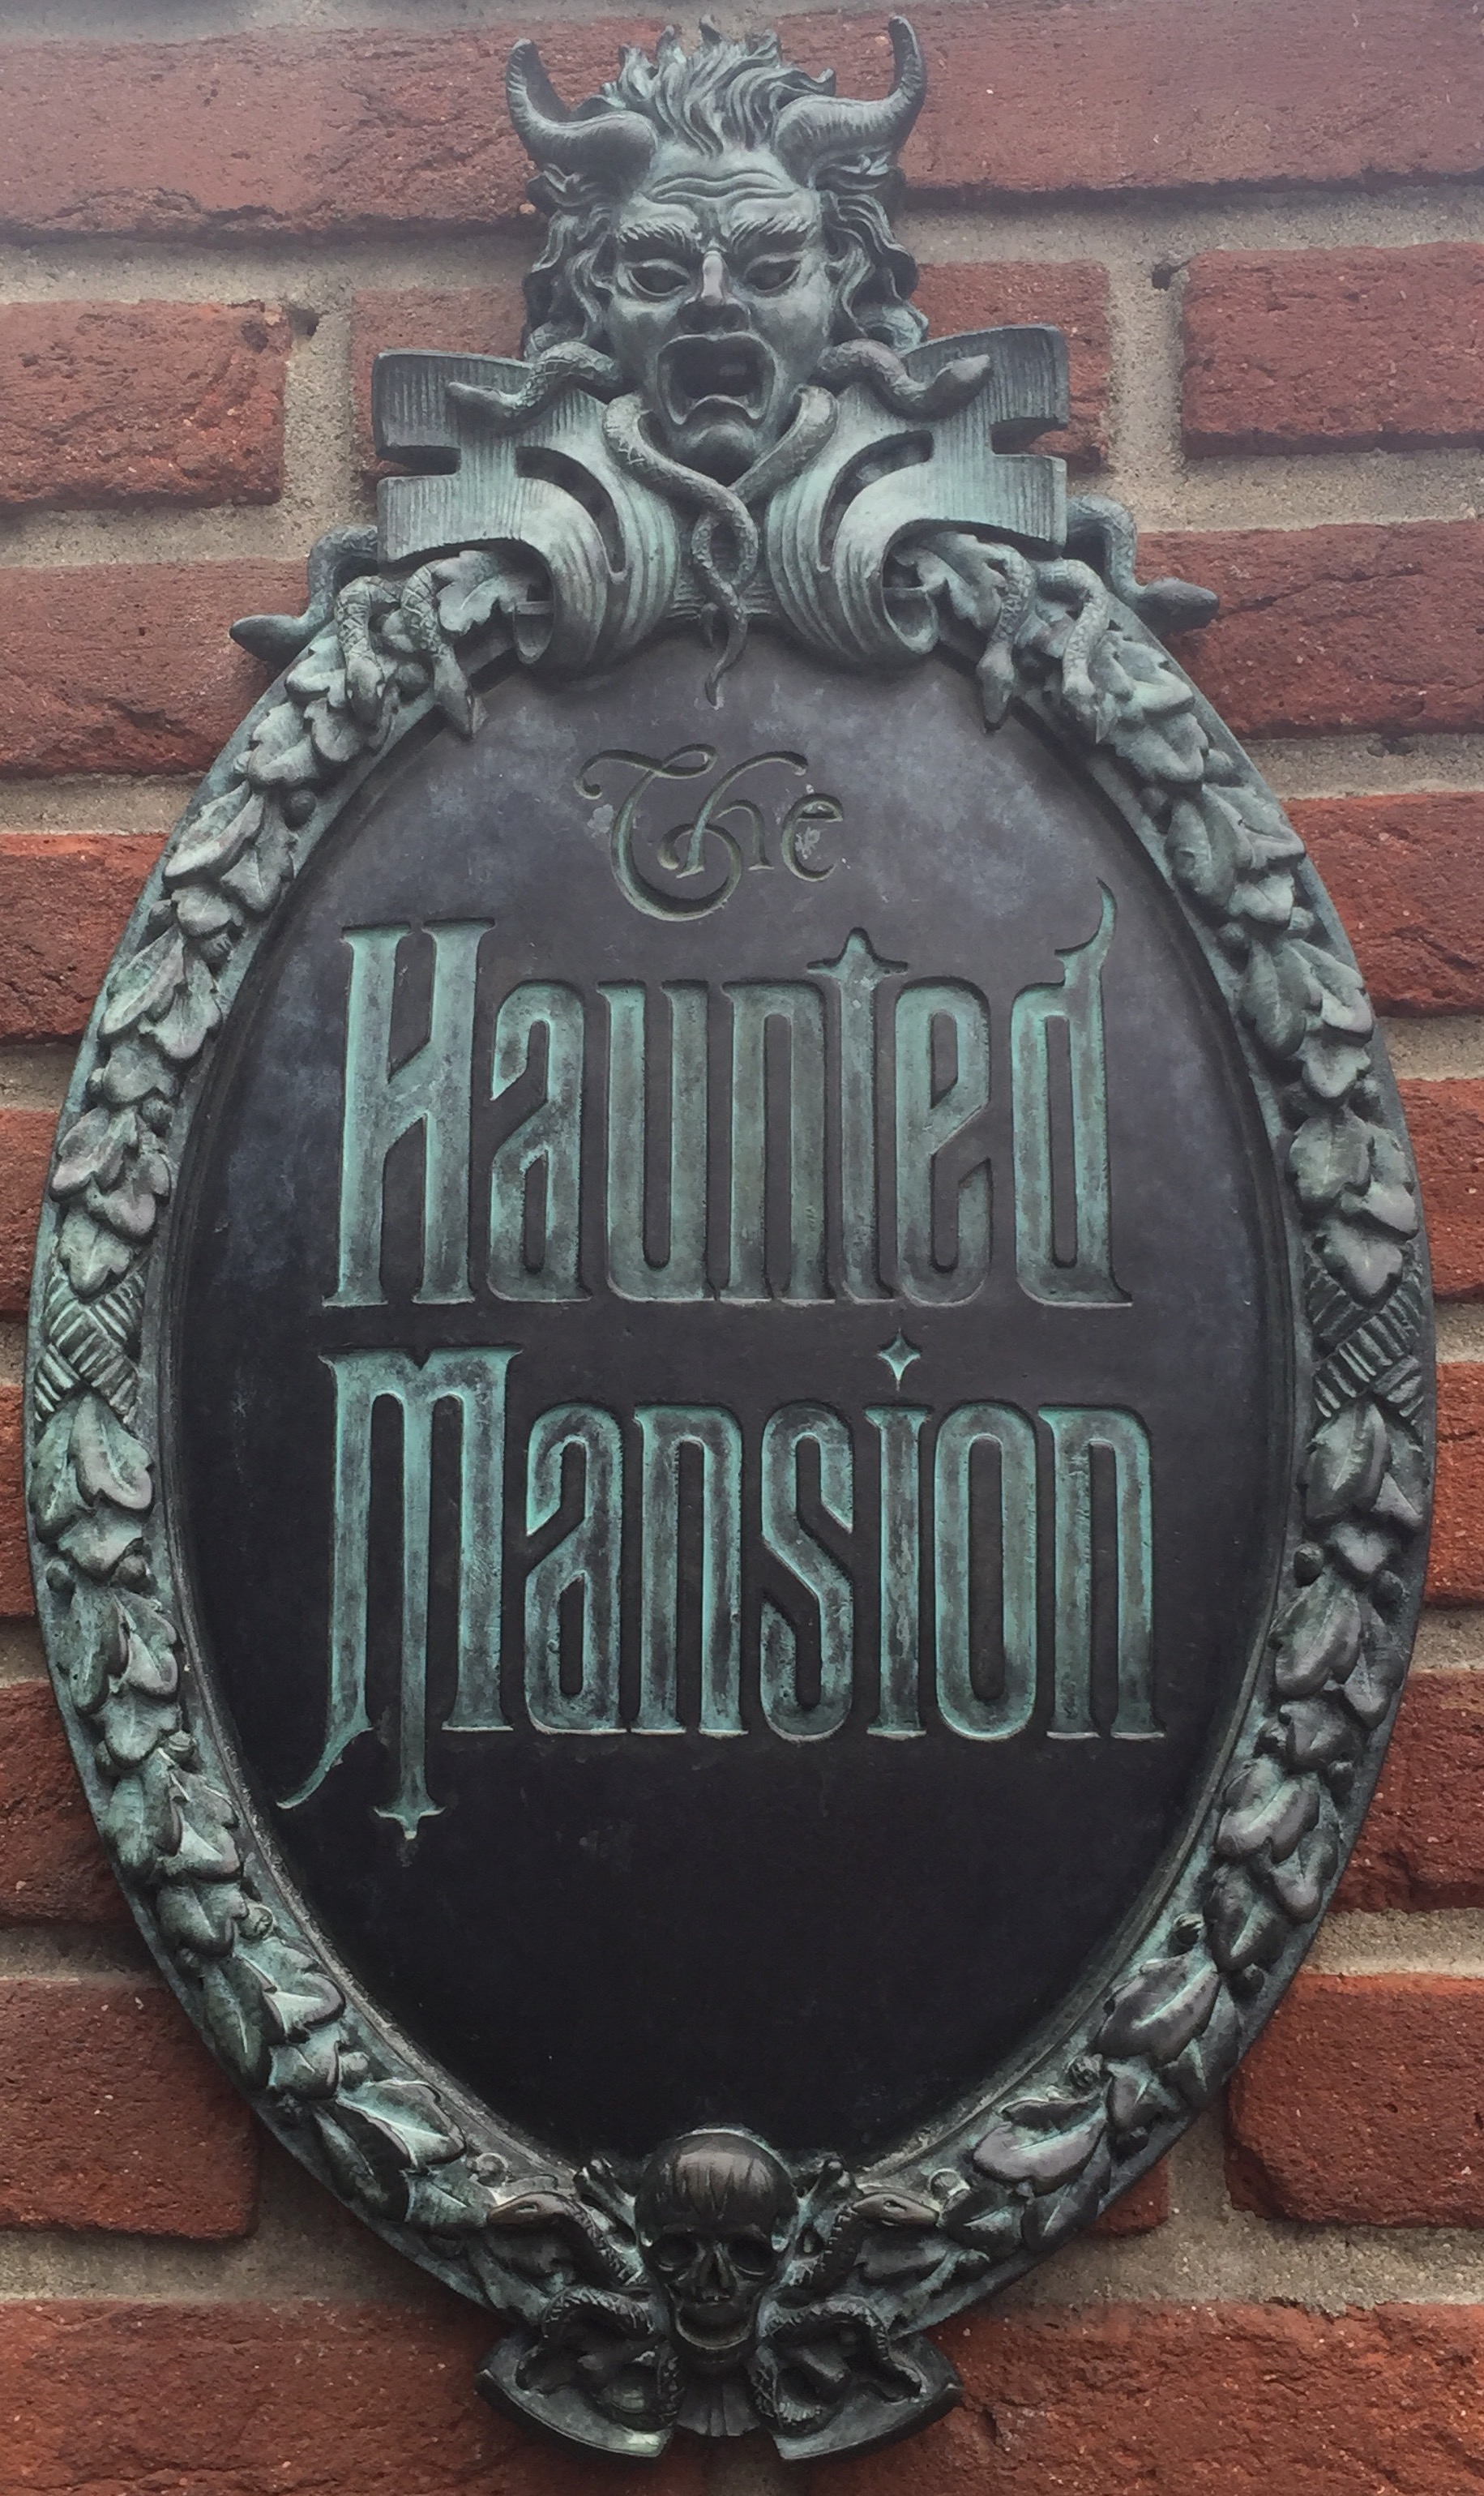 Photo of the Disneyland Haunted Mansion attraction sign